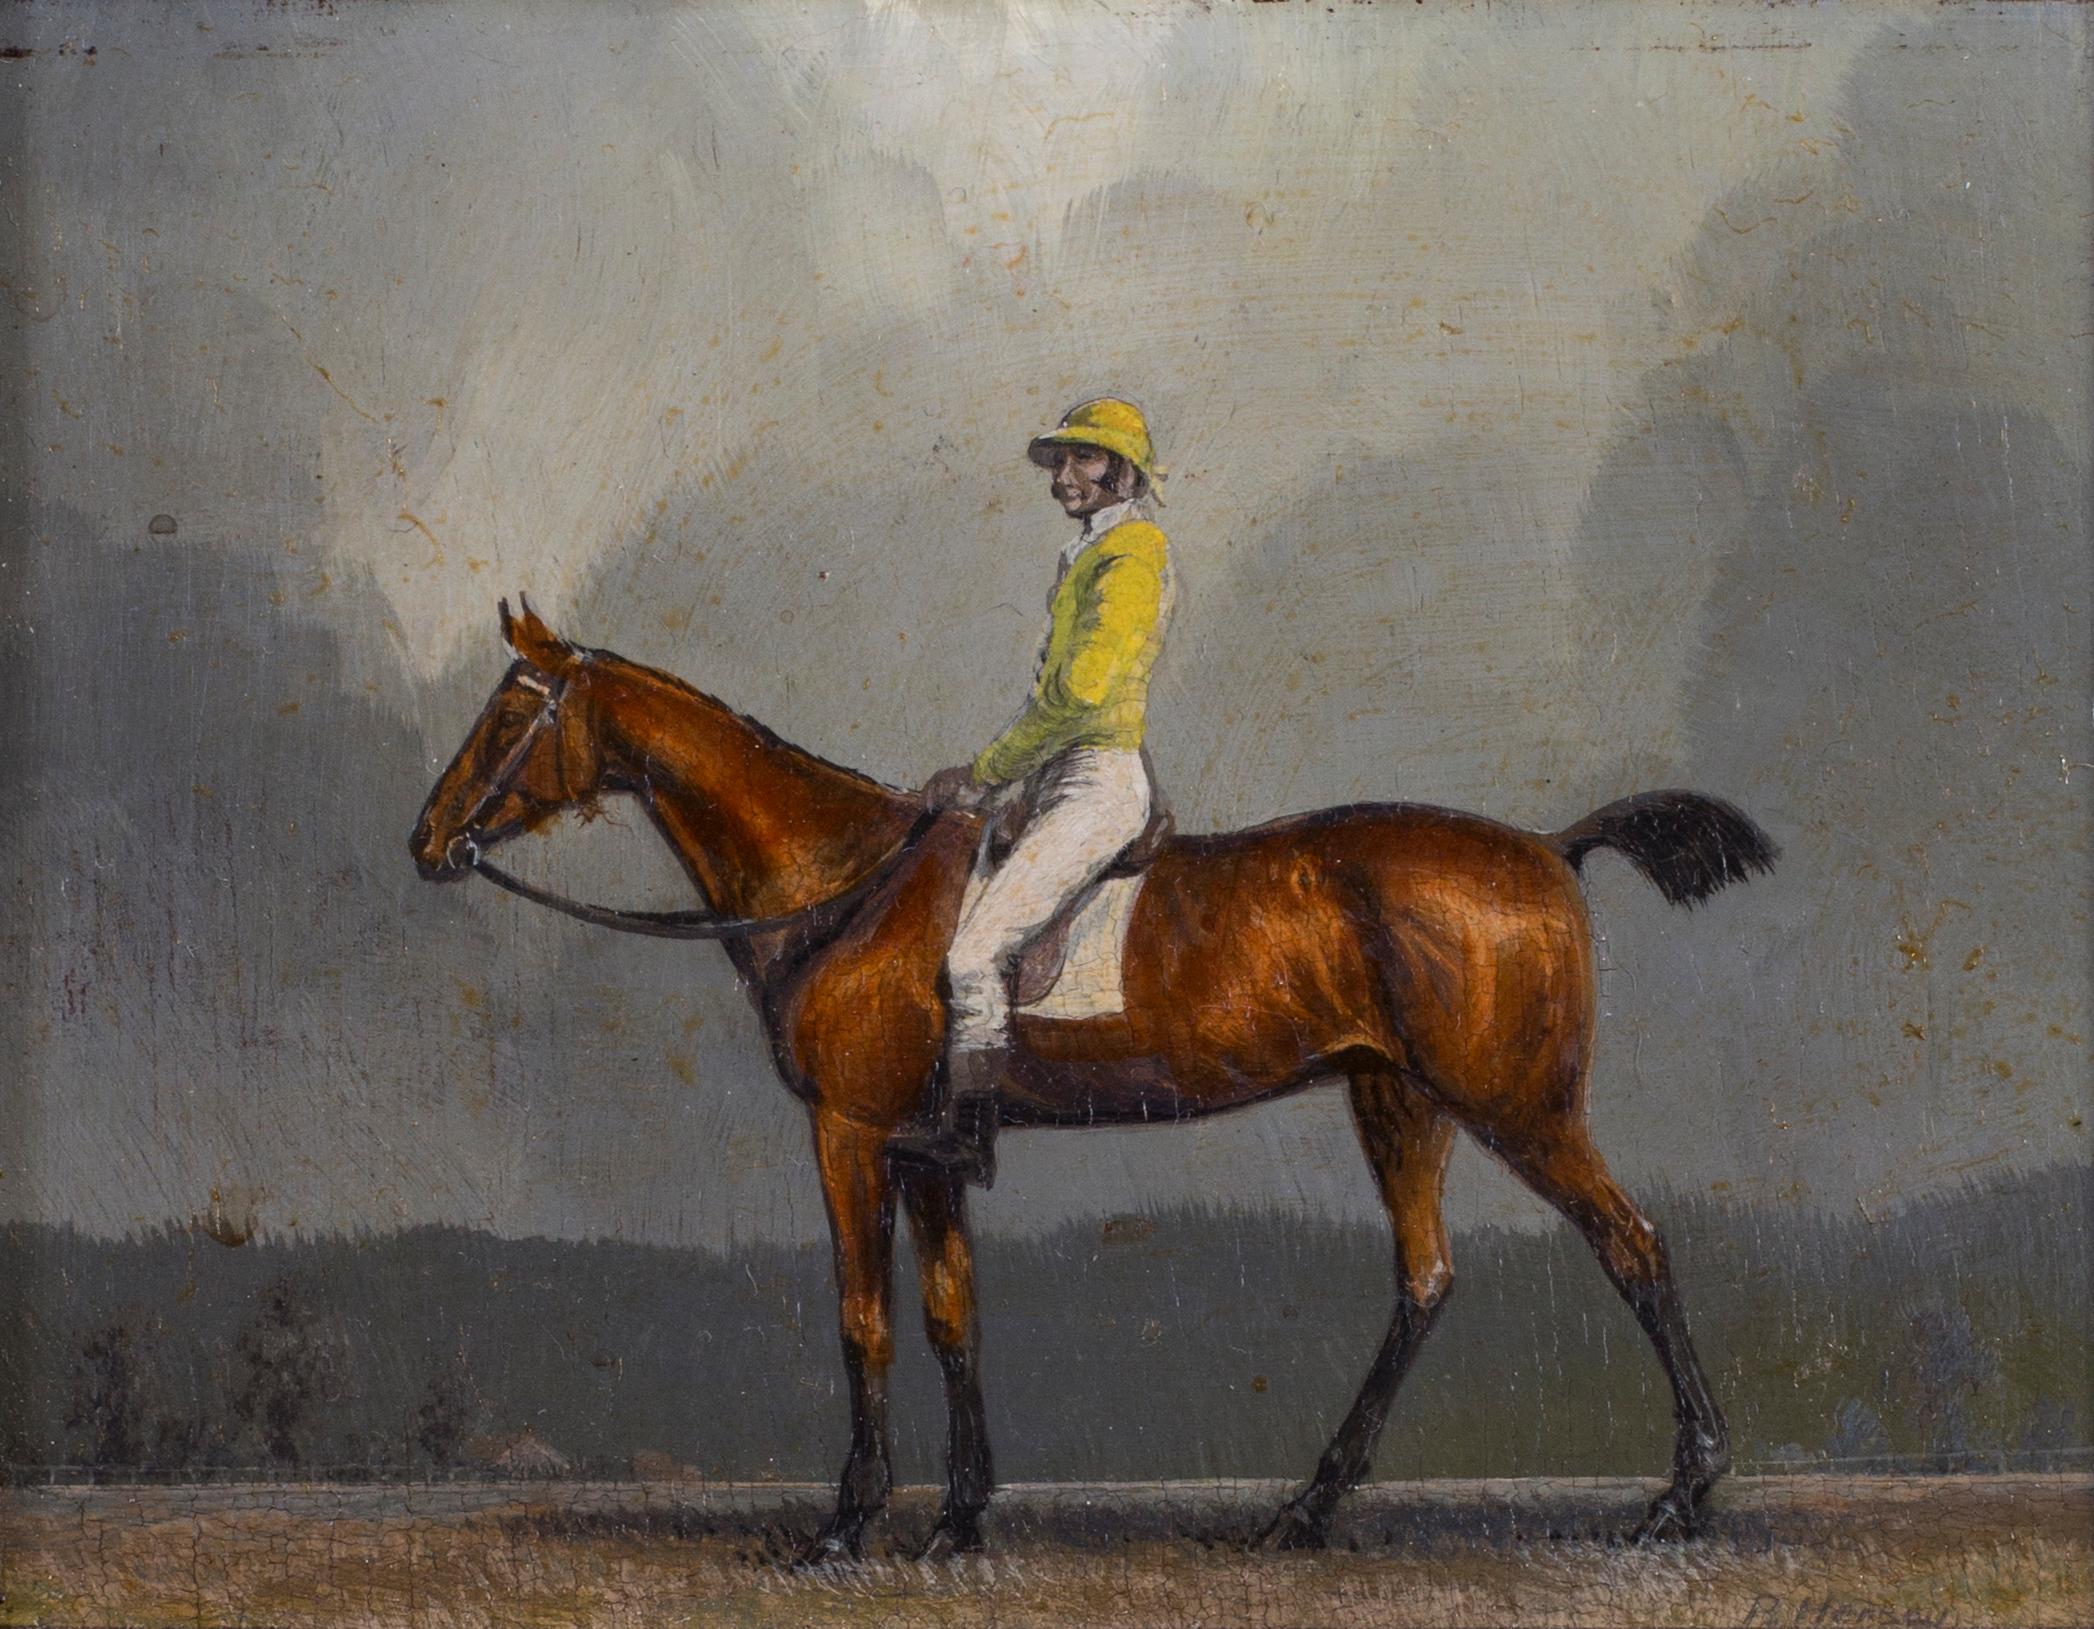 Bob Hersey (British, 1936 - 2015)
Jockeys and their mount
Signed ‘R. Hersey’
Oil on panel
3.1/4 x 4.1/4 in. (8.3 x 10.7 cm.)

Bob Hersey was an artist and wrote and illustrated several childrens’ books.  He was also very successful as a commercial